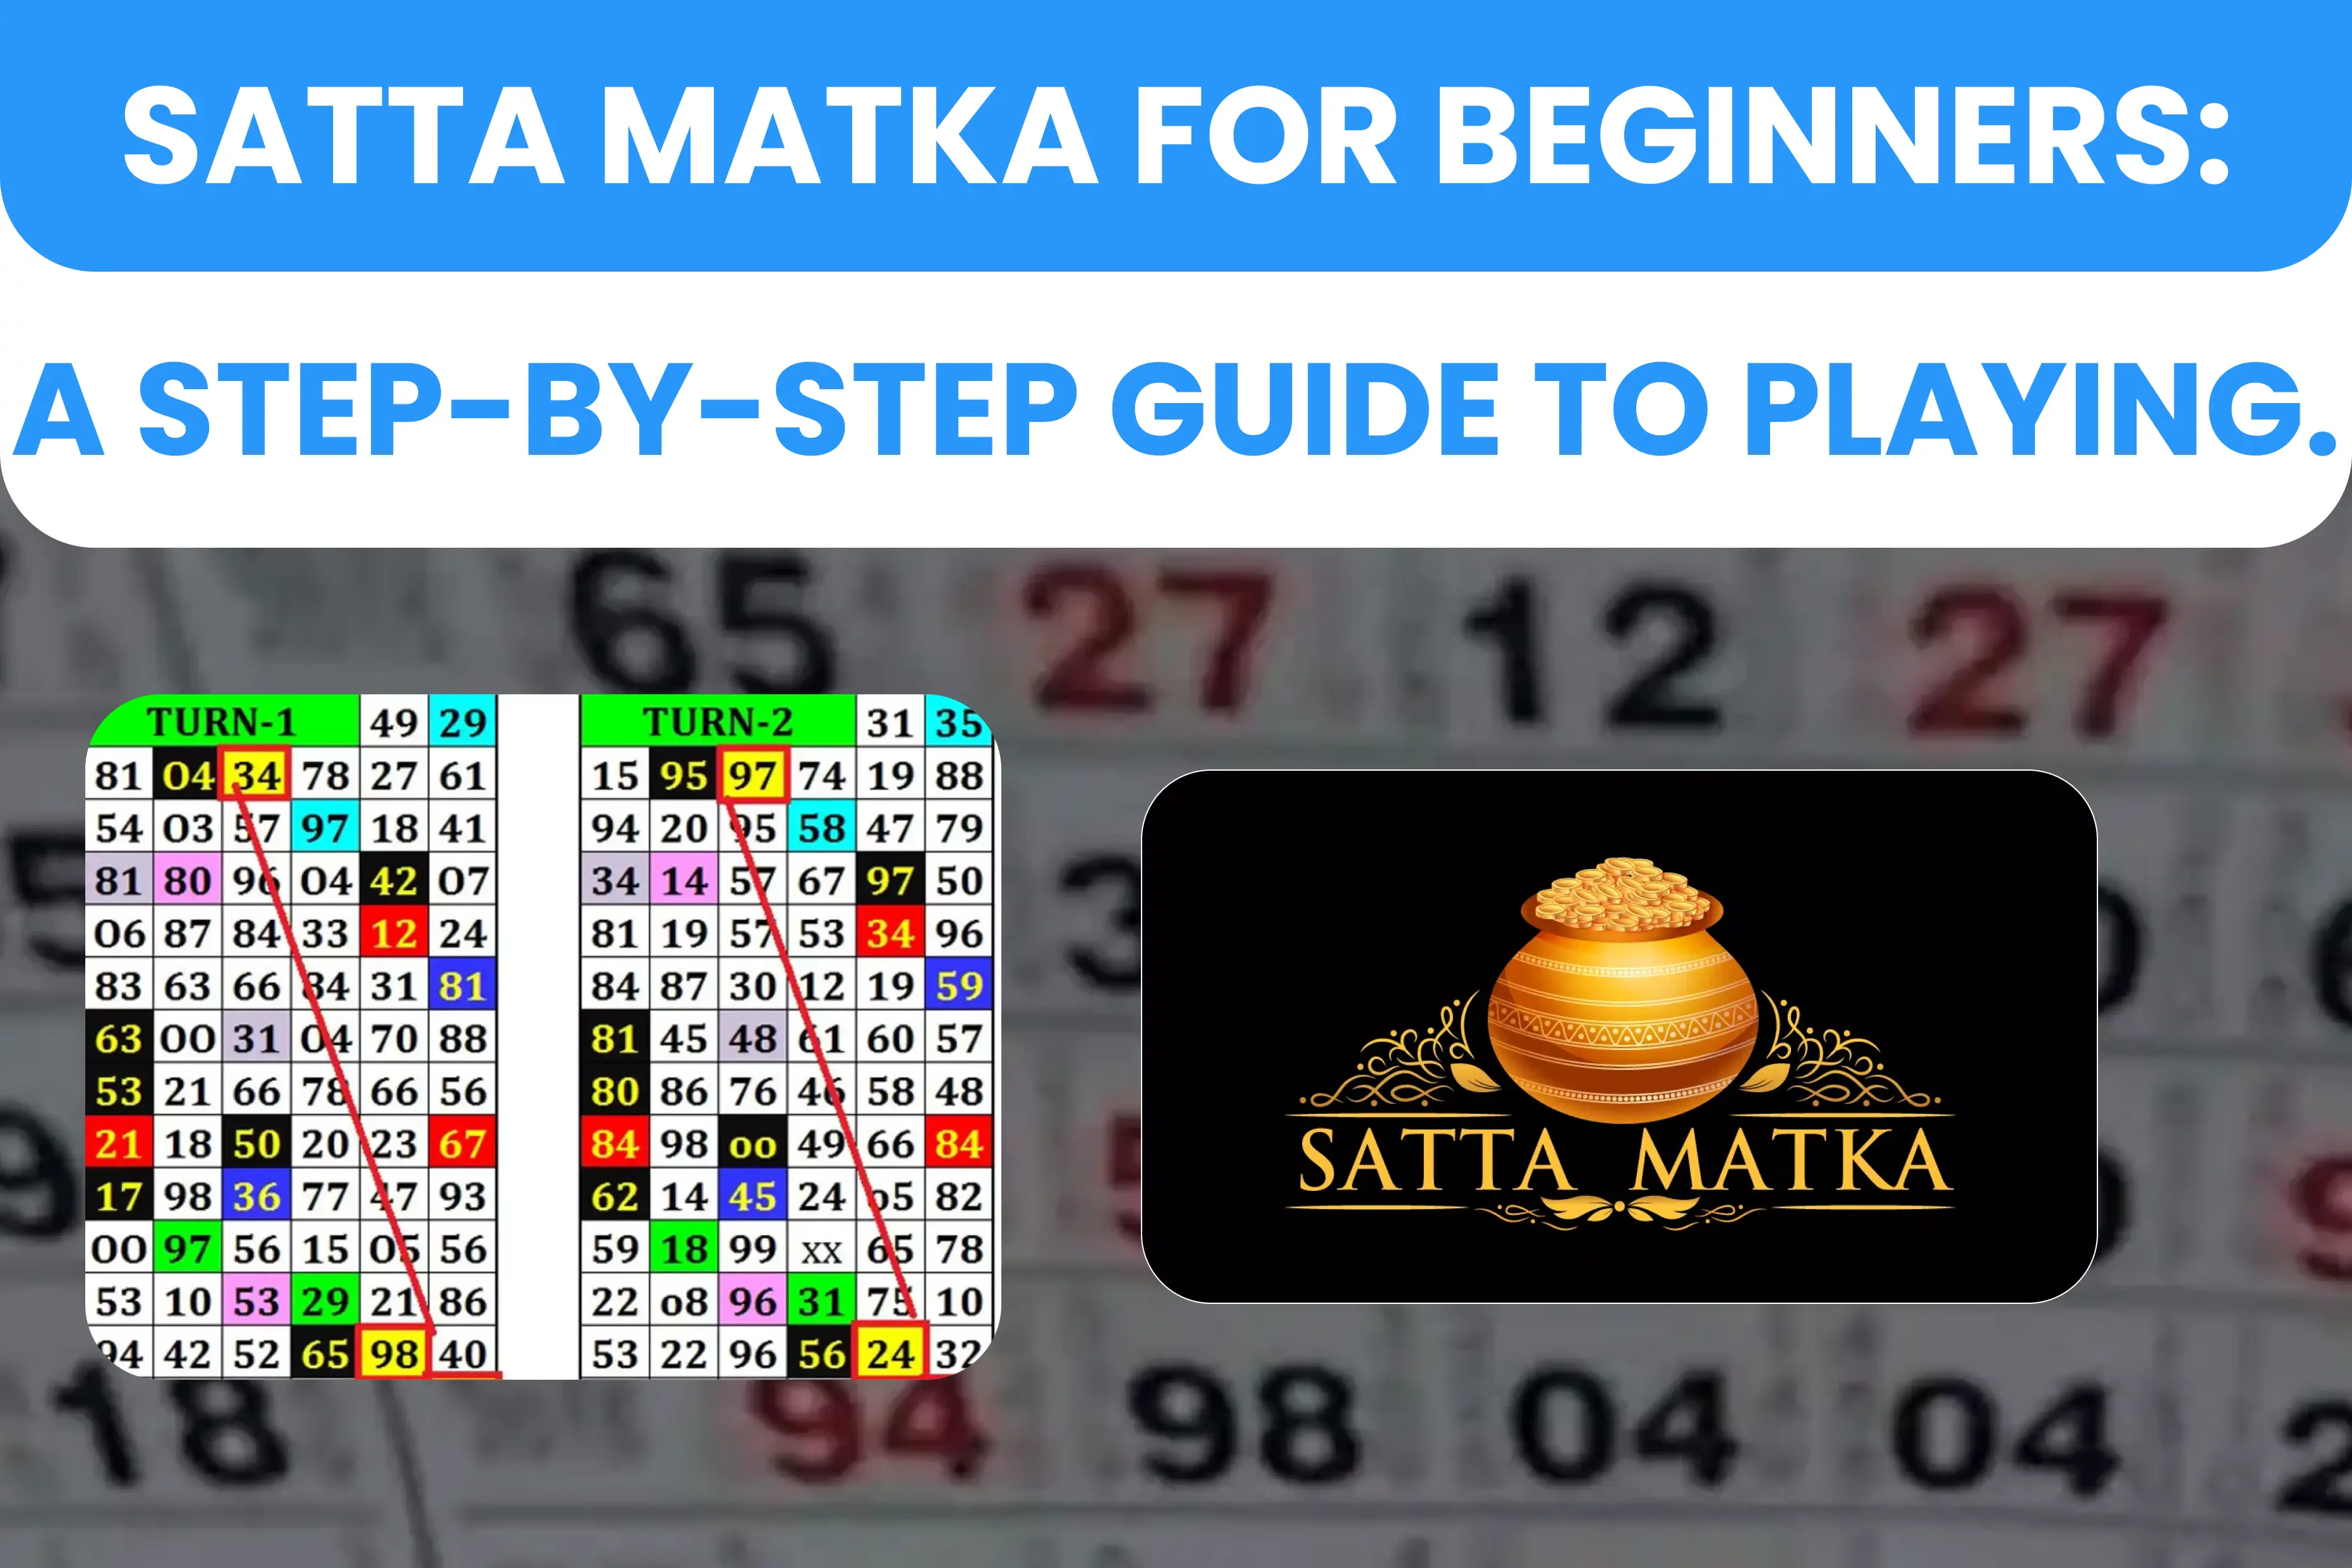 Satta Matka for Beginners: A Step-by-Step Guide to Playing